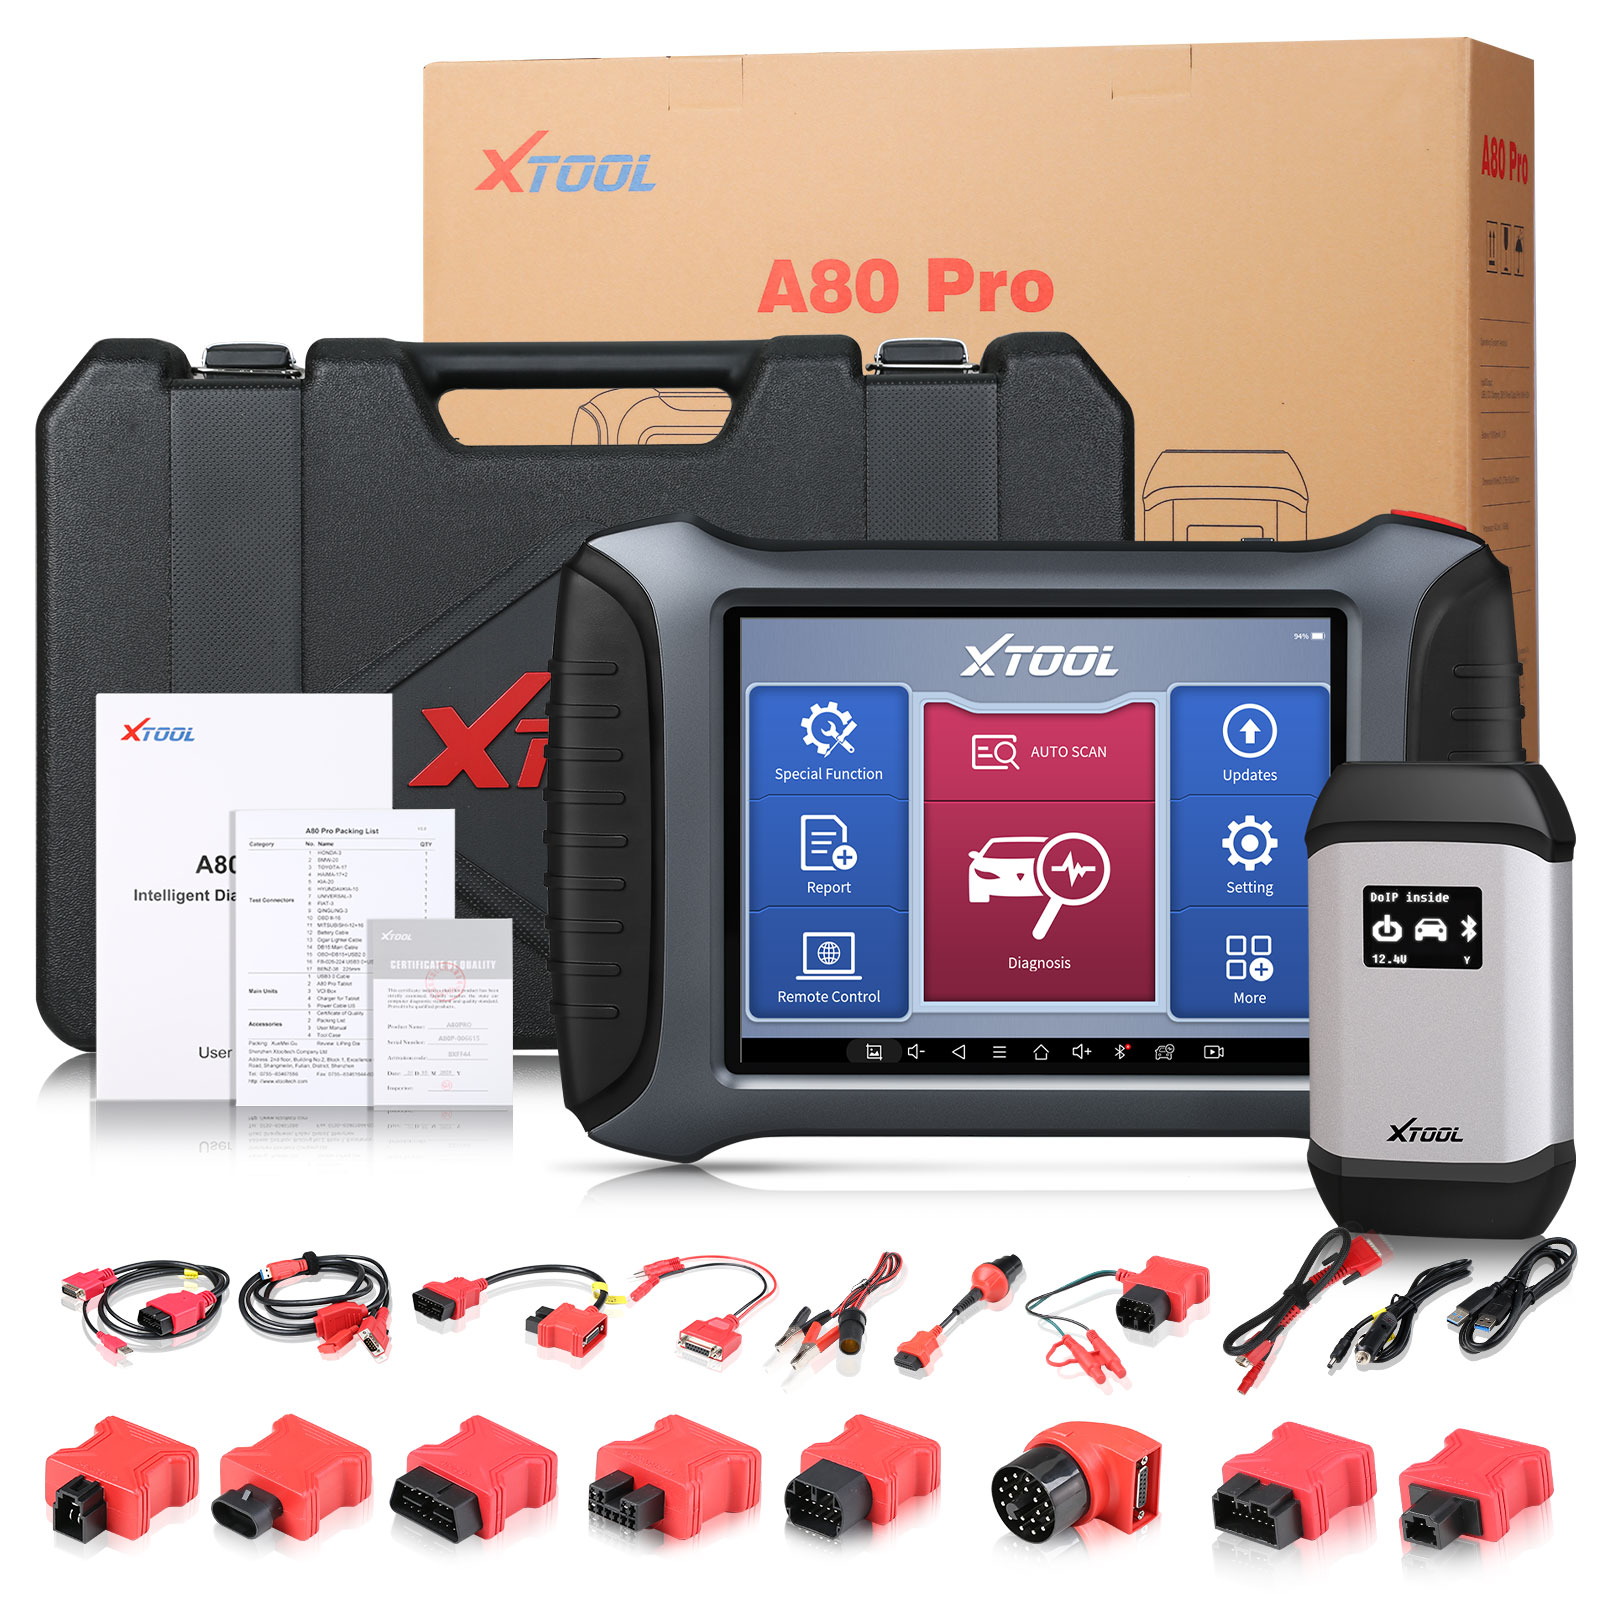 XTOOL A80 Pro Package List 